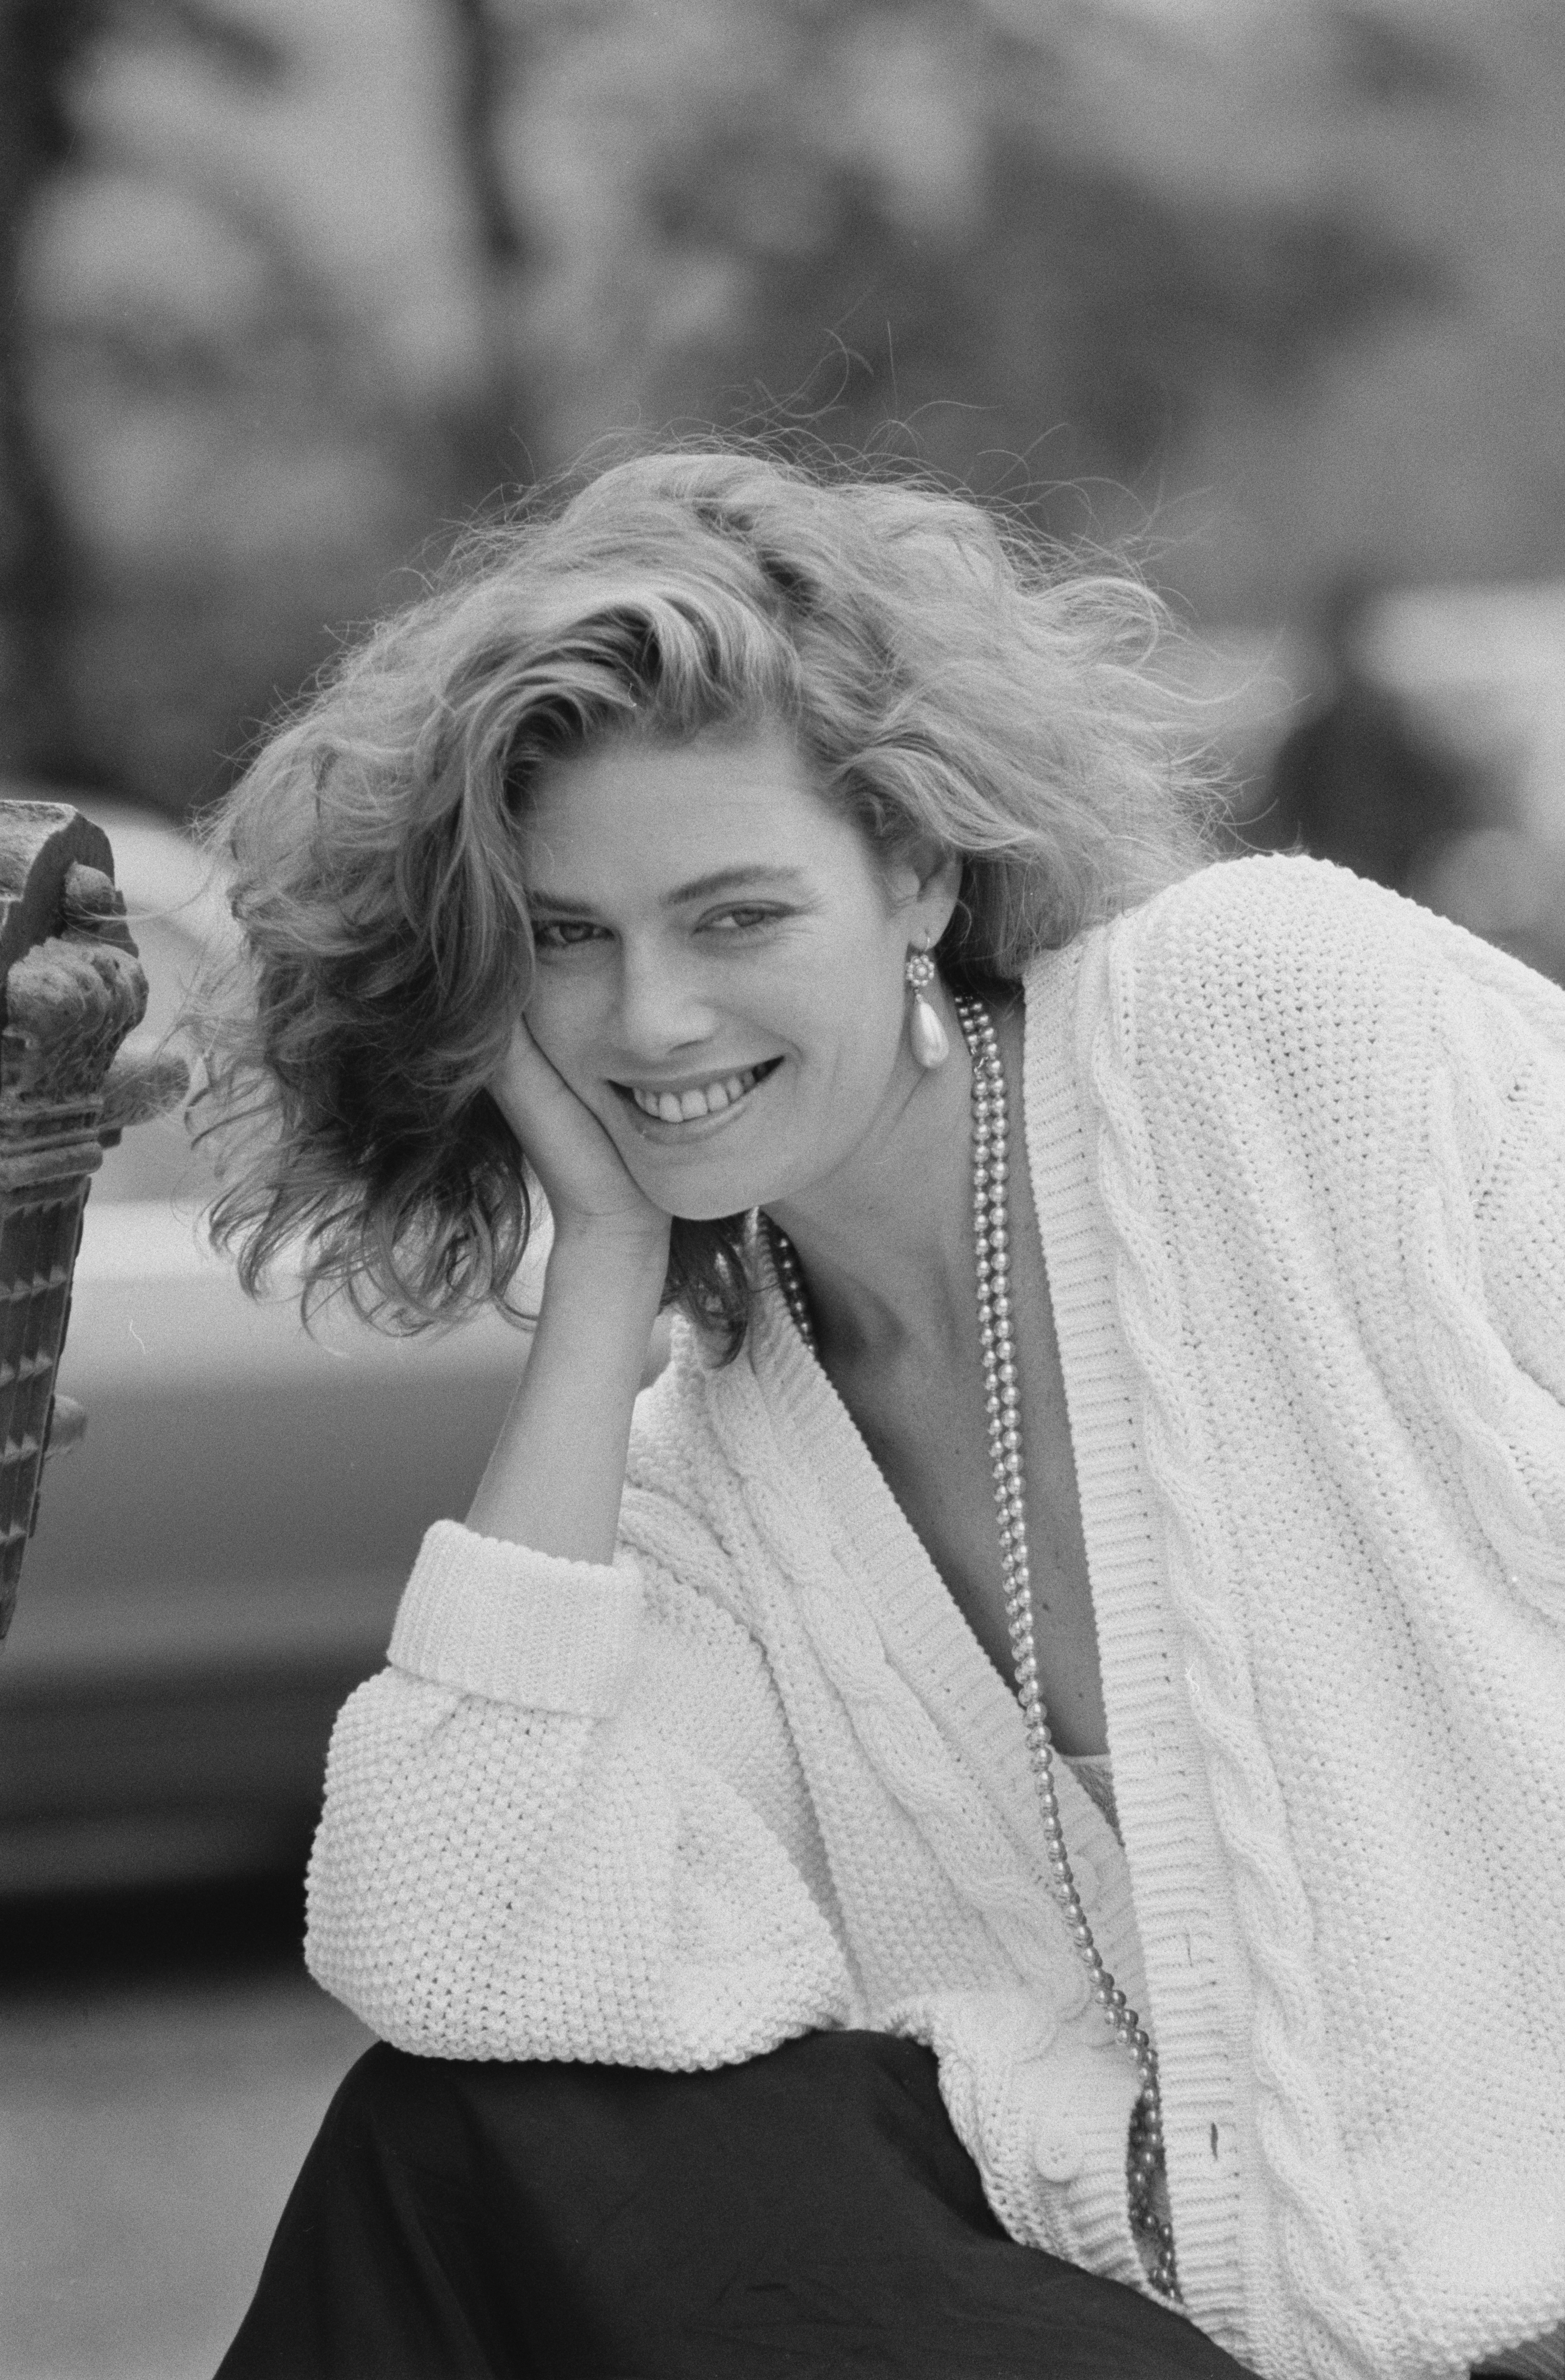 Kelly McGillis poses during a portrait session on May 15, 1985 in London, England | Source: Getty Images